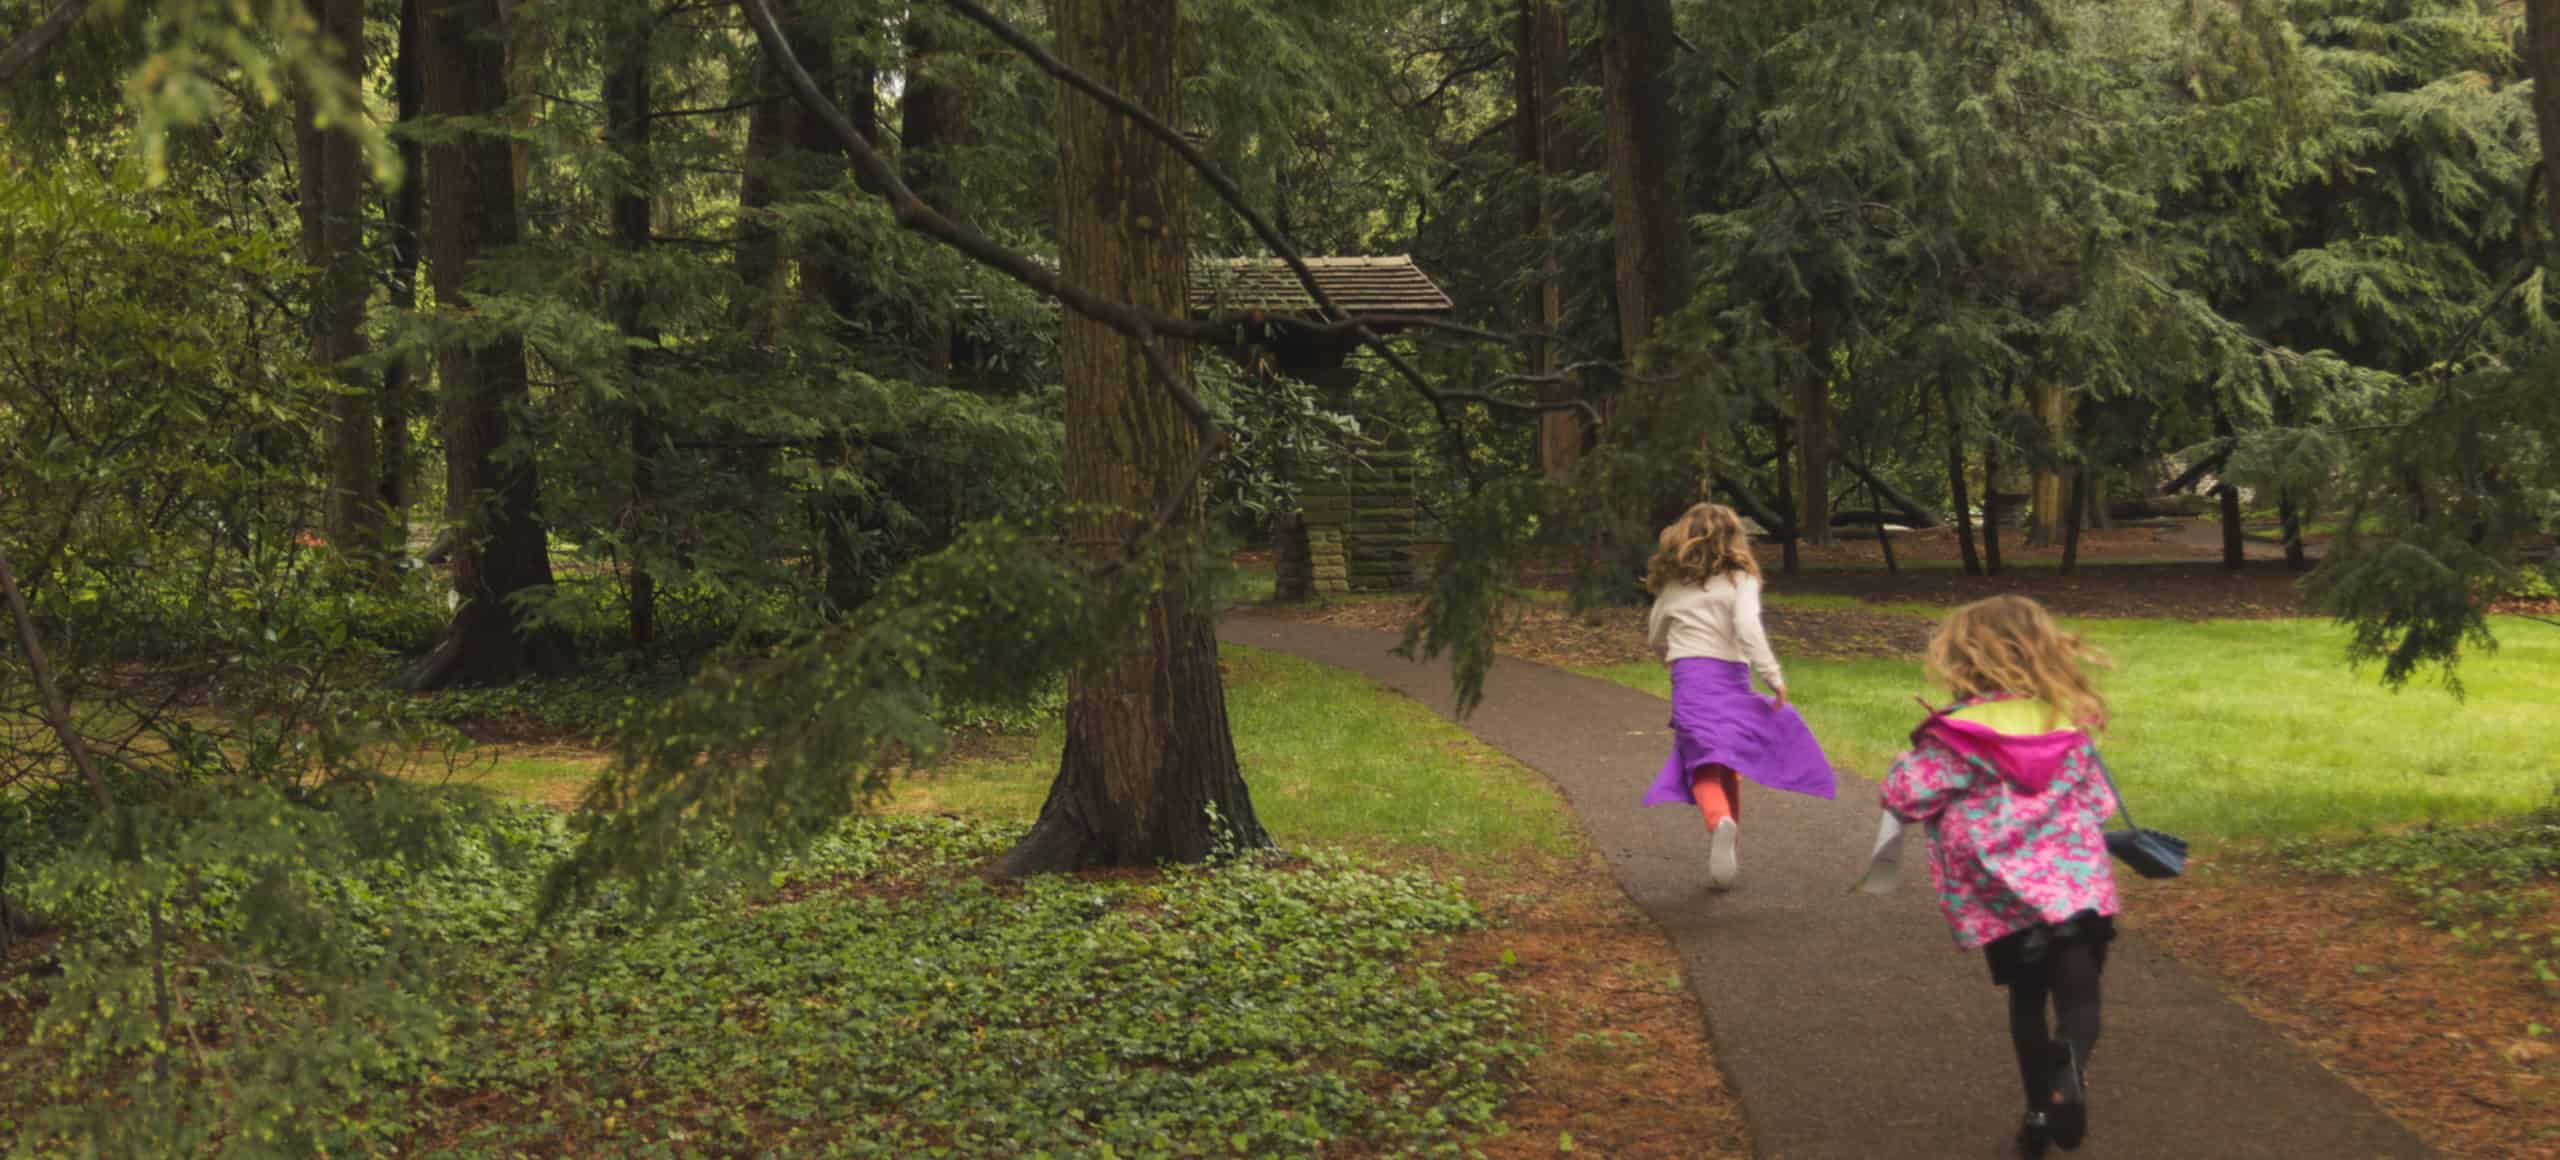 Two children run along a path through a natural setting with tall trees.